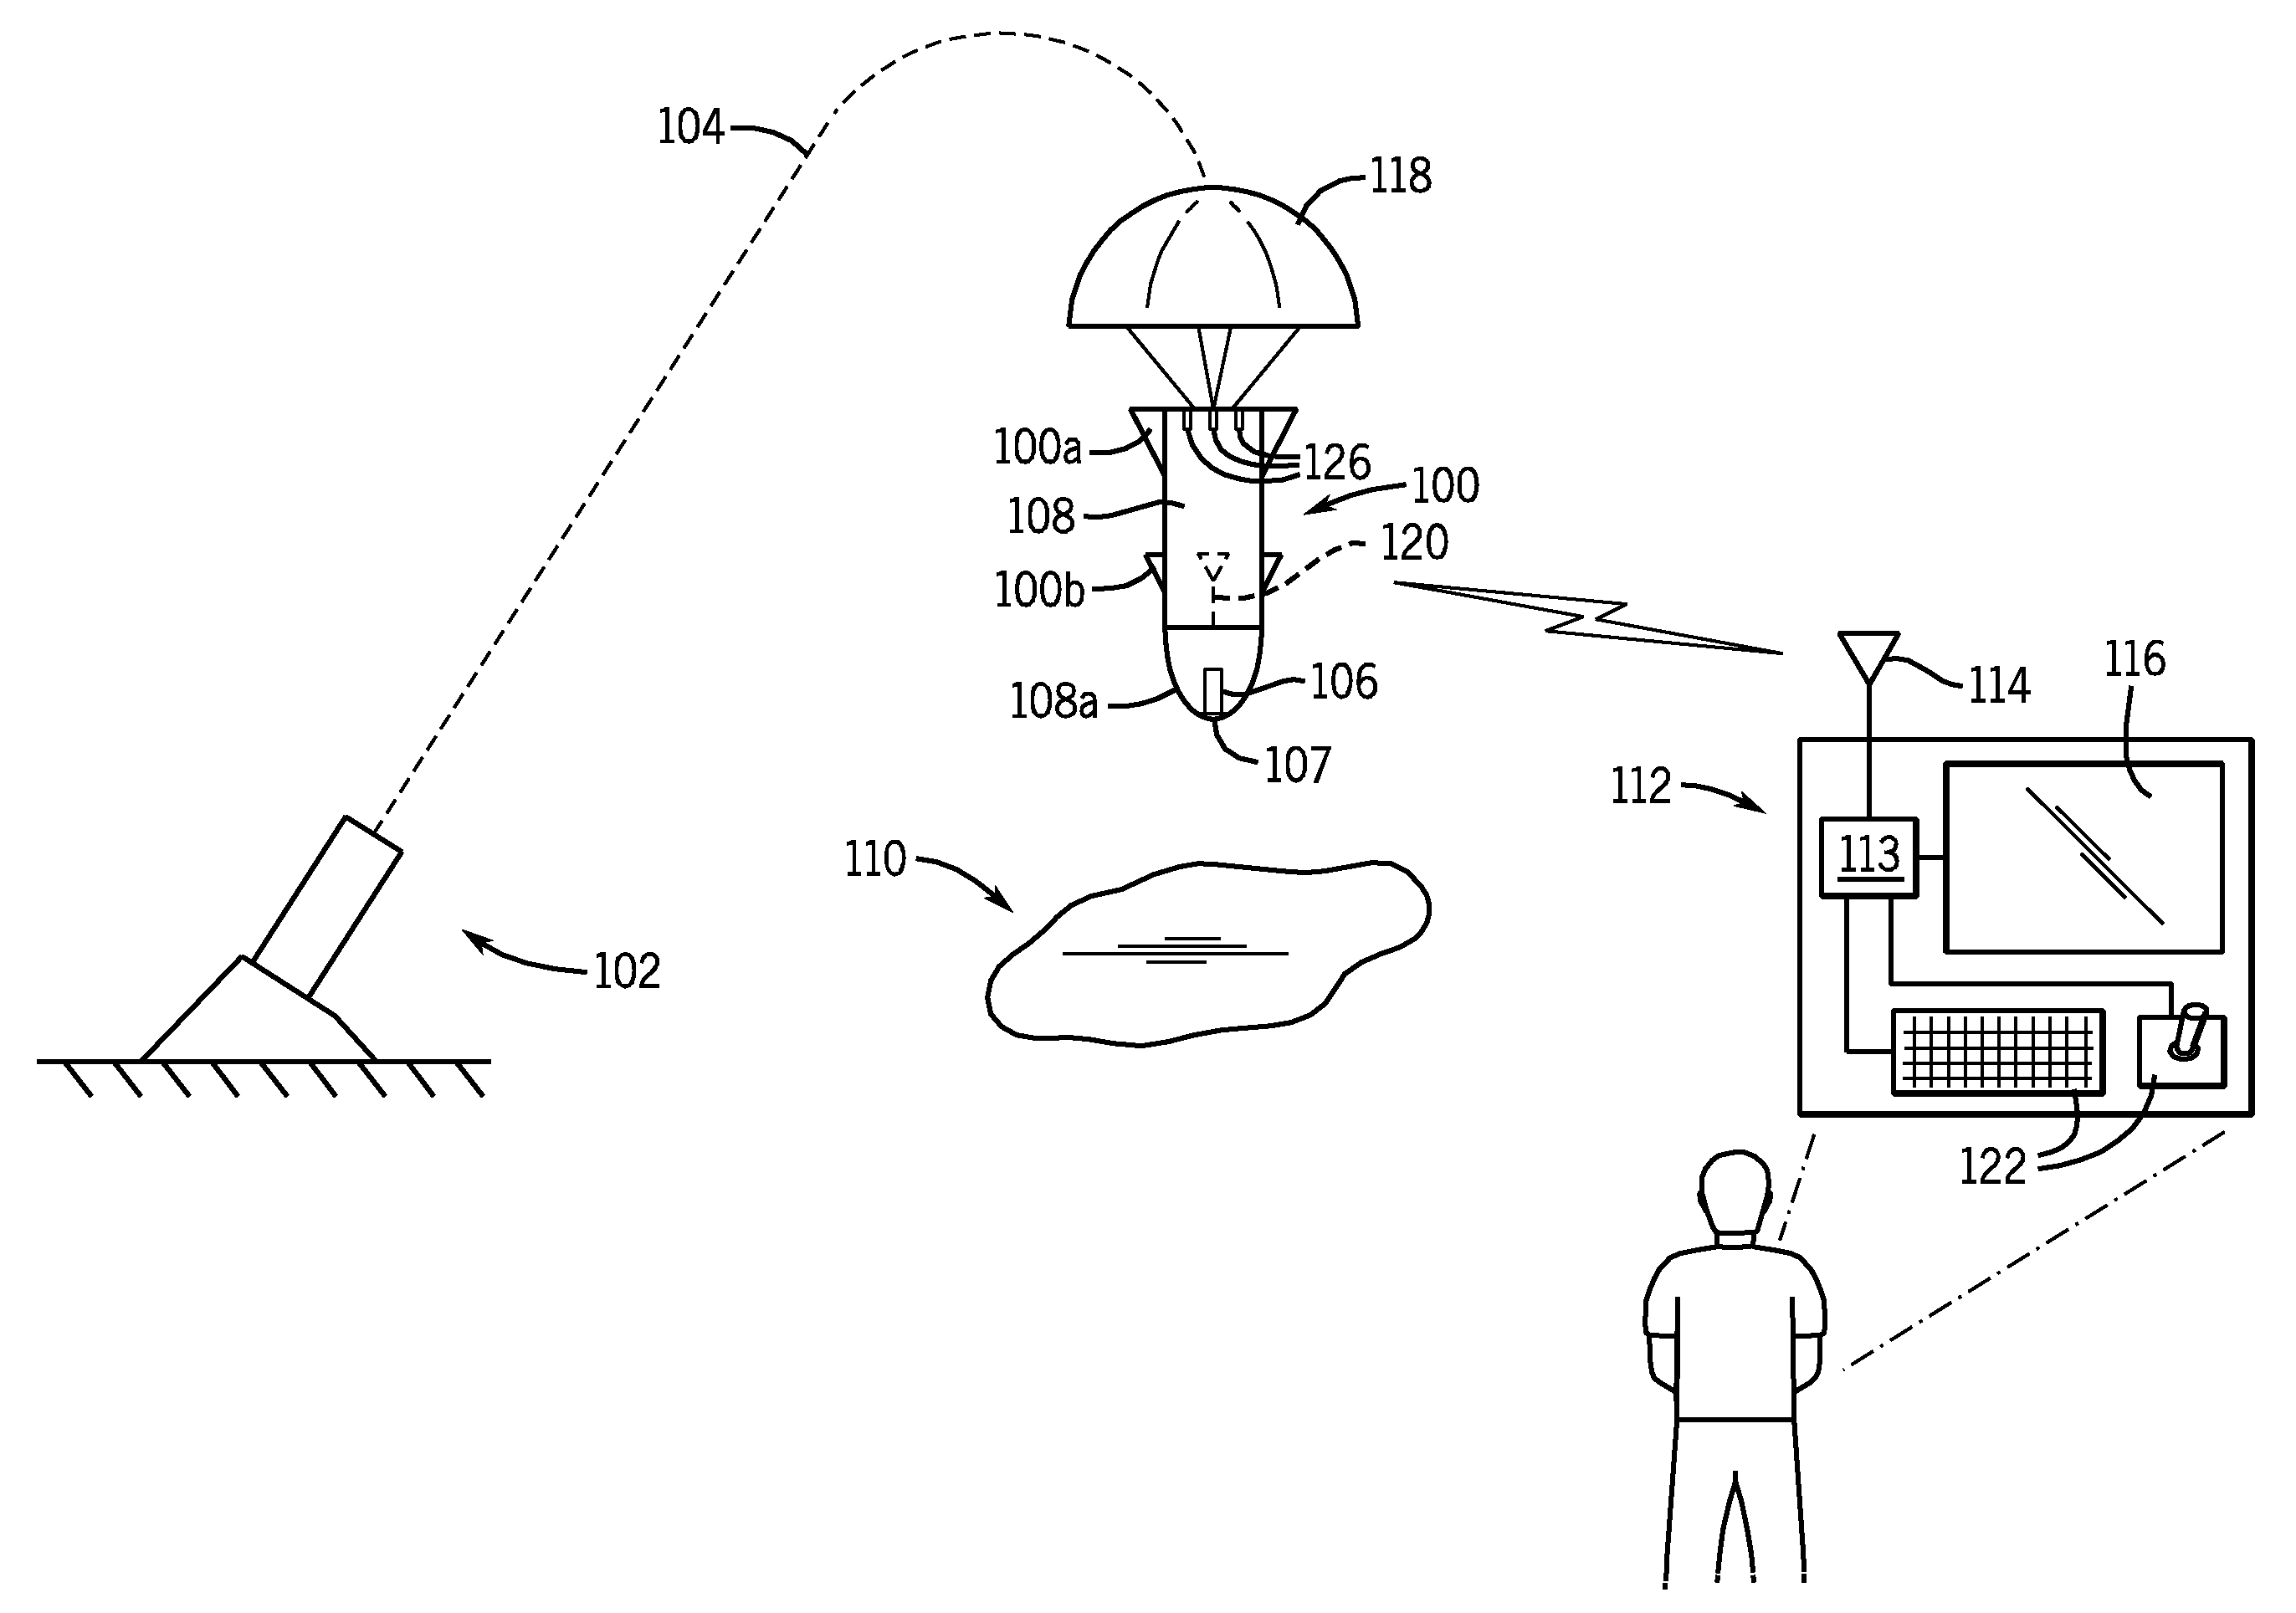 Method For Displaying Successive Image Frames on a Display to Stabilize the Display of a Selected Feature in the Image Frames